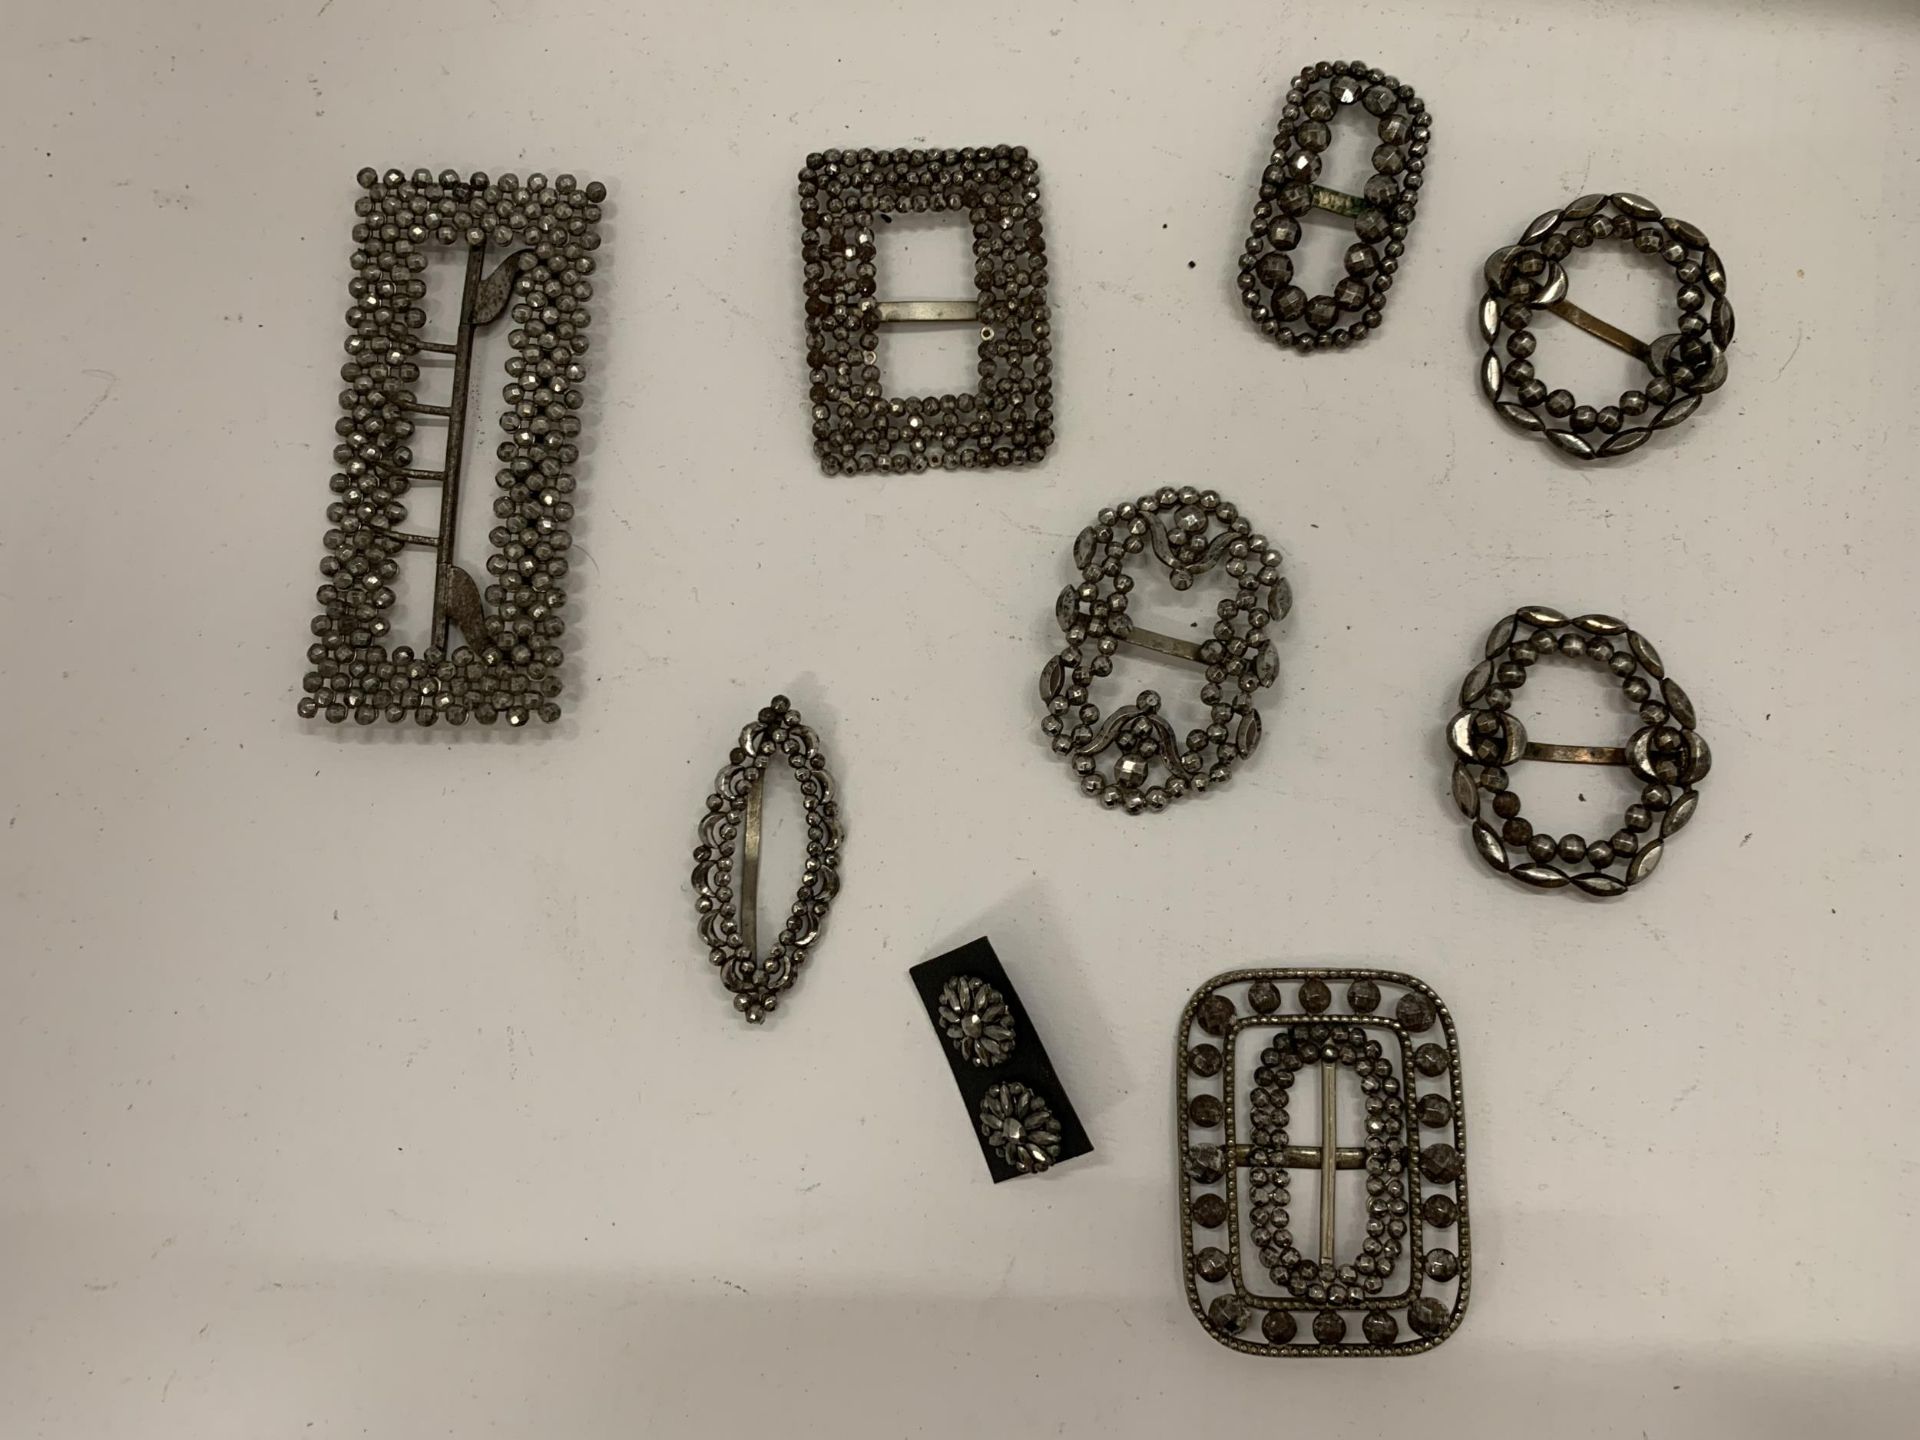 A QUANTITY OF 18TH CENTURY STYLE STEEL JEWELLERY SHOE BUCKLES PLUS A PAIR OF EARRINGS - Image 5 of 6